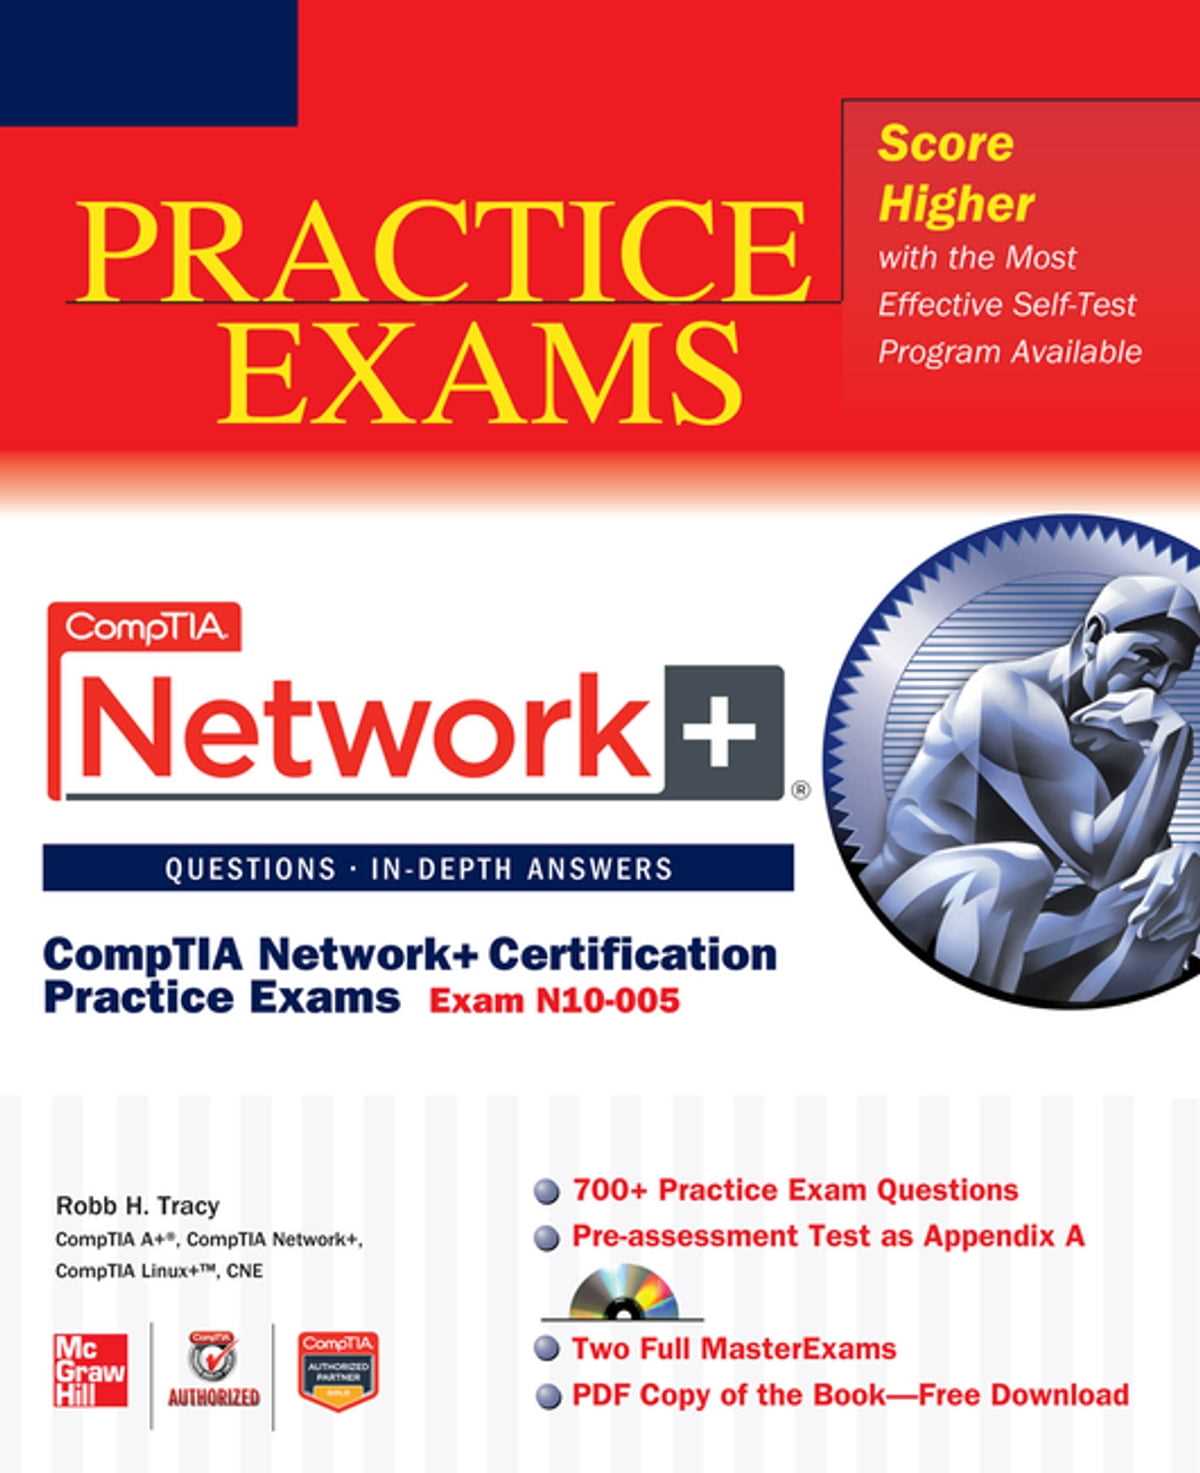 Tips for Effective Preparation Using CNA Free Practice Exams